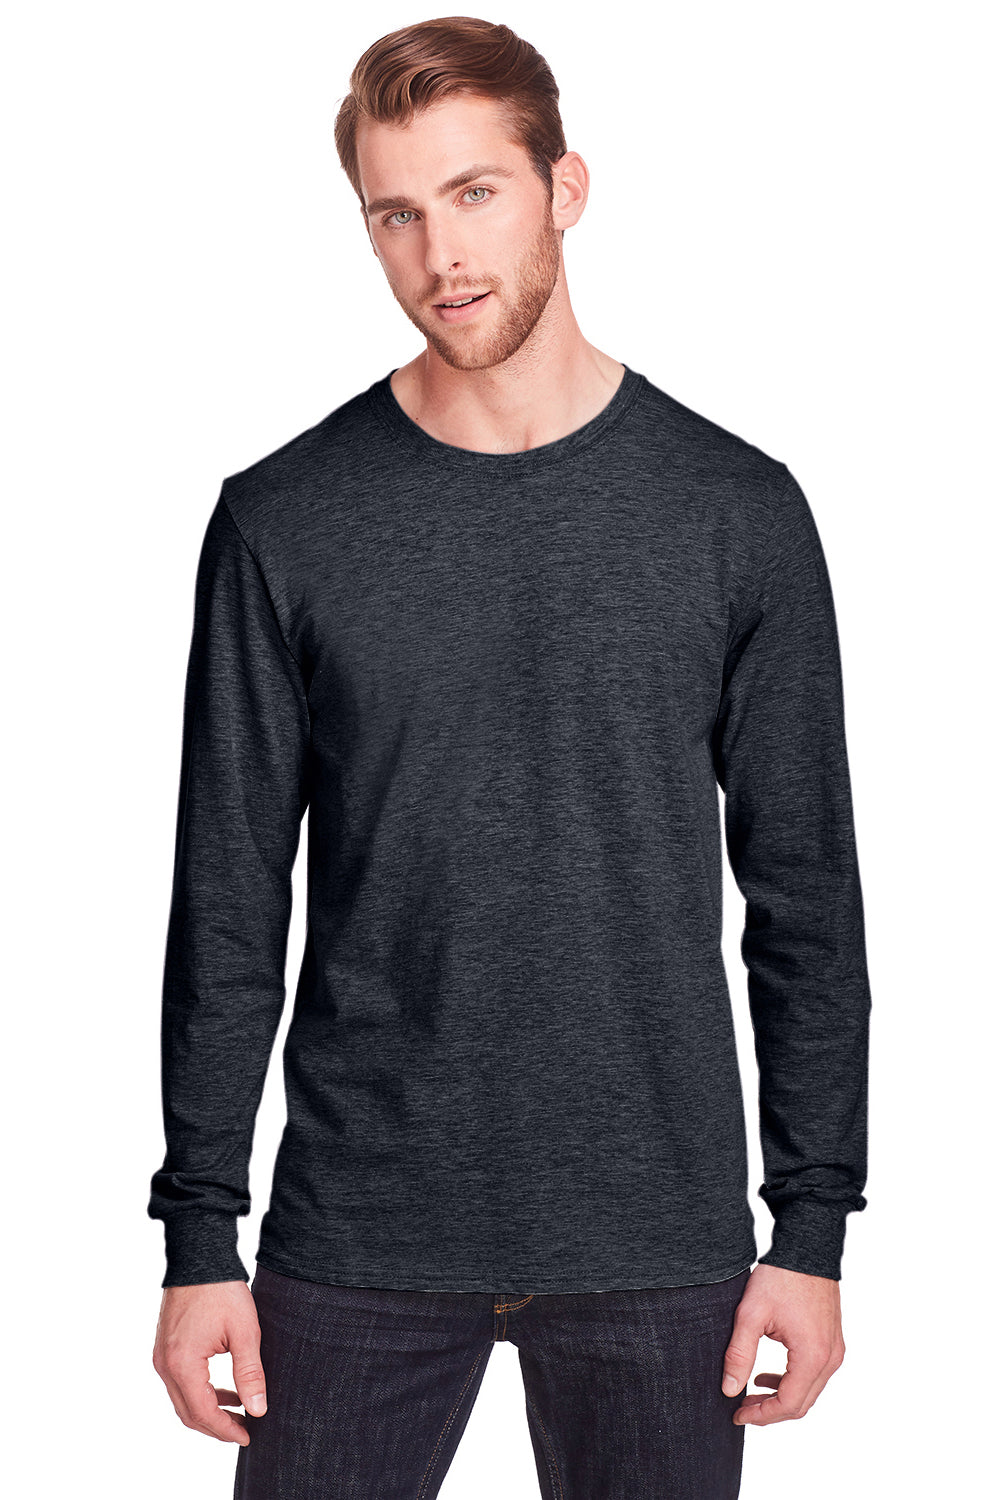 Fruit Of The Loom IC47LSR Mens Iconic Long Sleeve Crewneck T-Shirt Heather Black Front